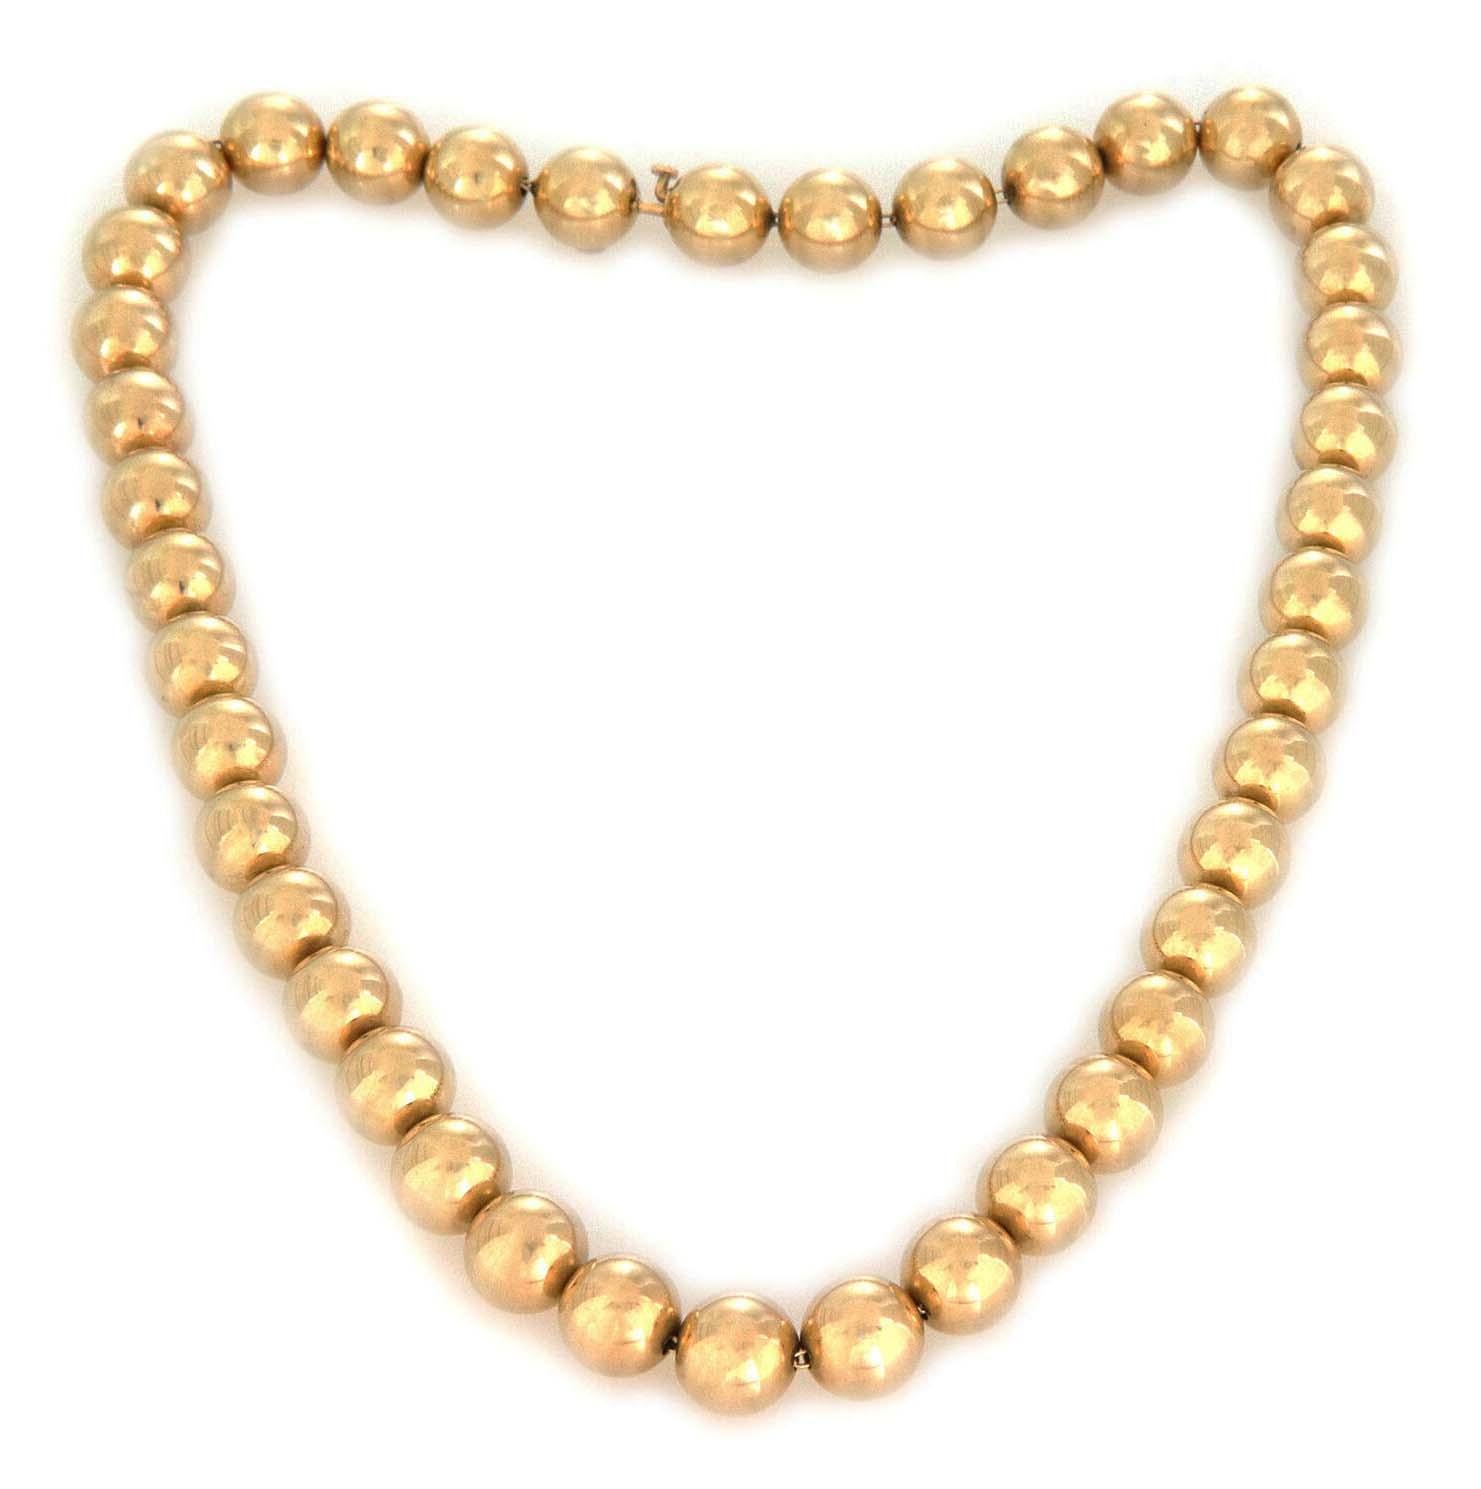 This lovely vintage necklace is crafted from 14k yellow gold. It features high polished gold beads beads strung on a slim oval link chain. The beads are 9.5mm each and the necklace secure with a slim slide clasp with the 14k gold content